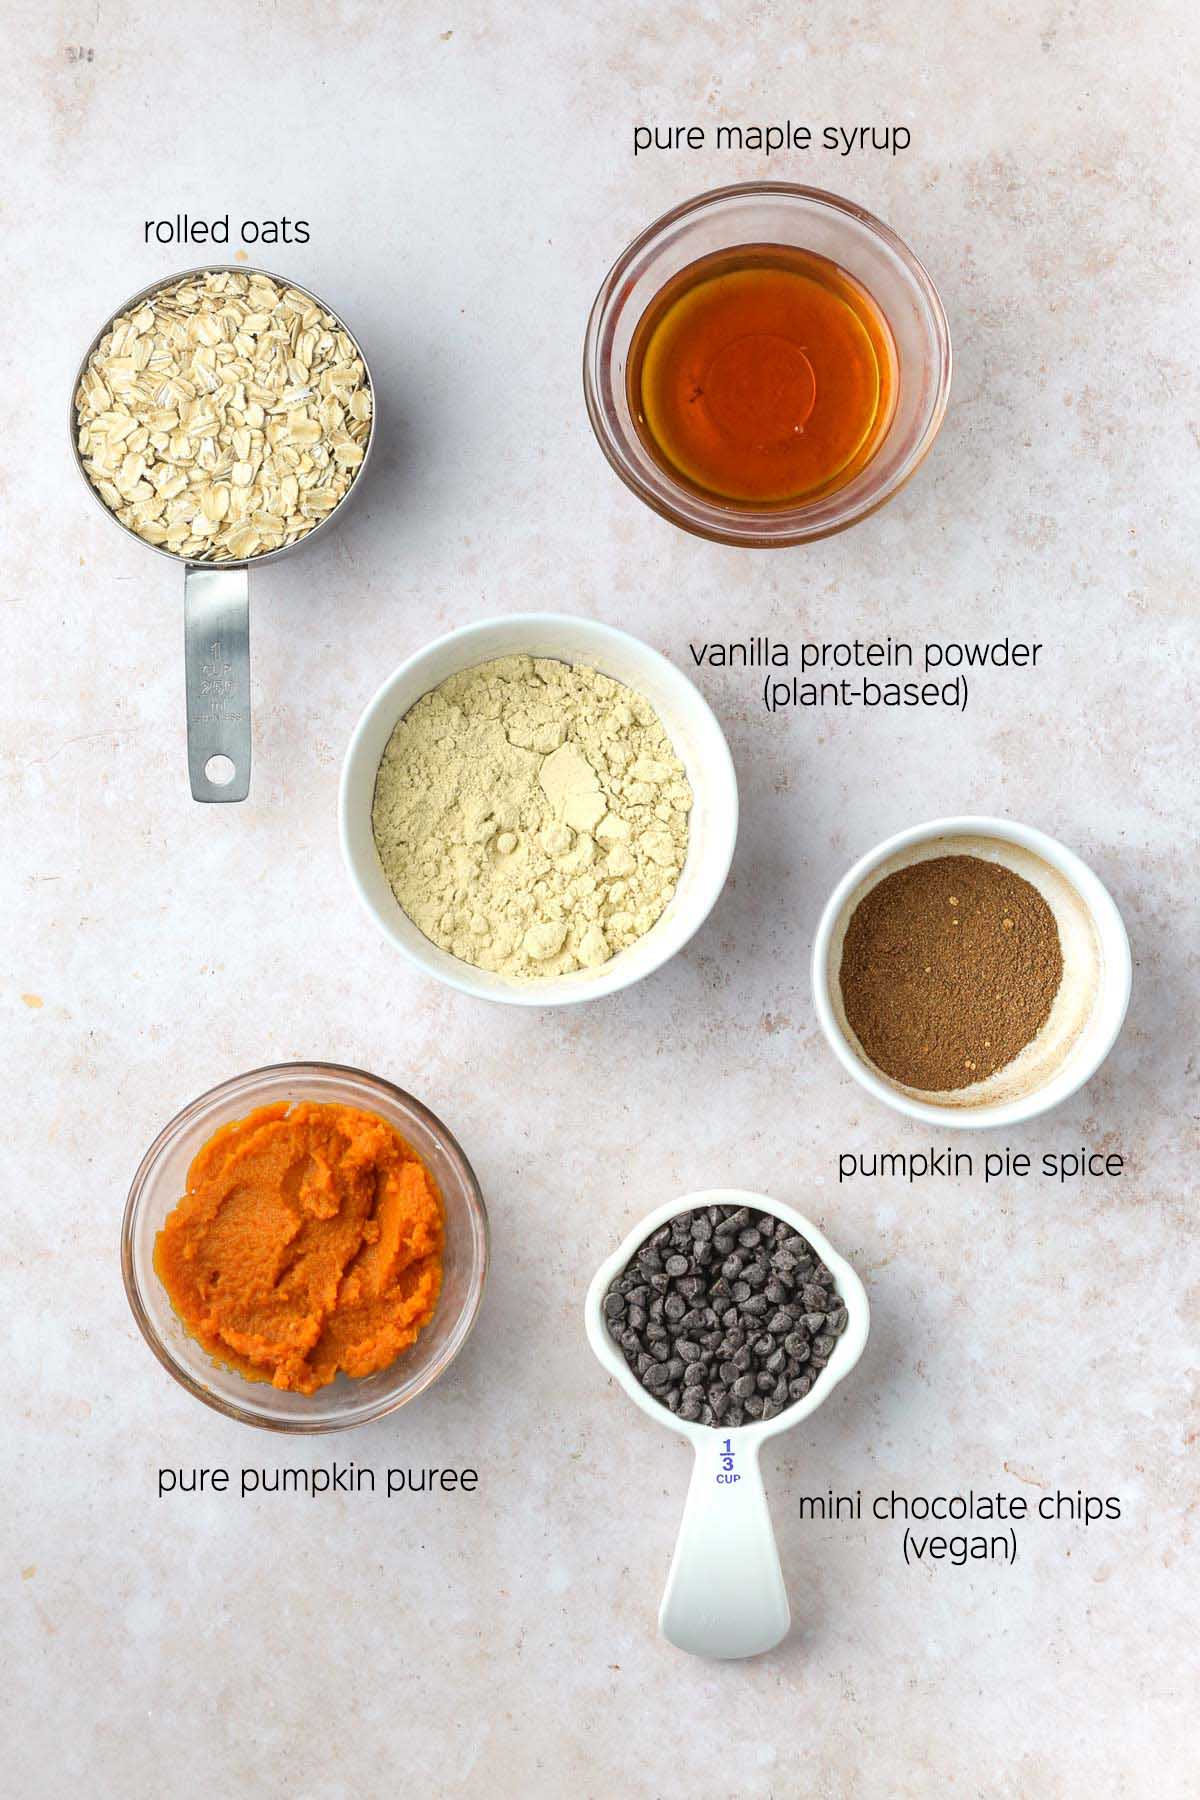 all ingredients to make the recipe prepared in bowls and measuring cups, shown from above on a marble surface.